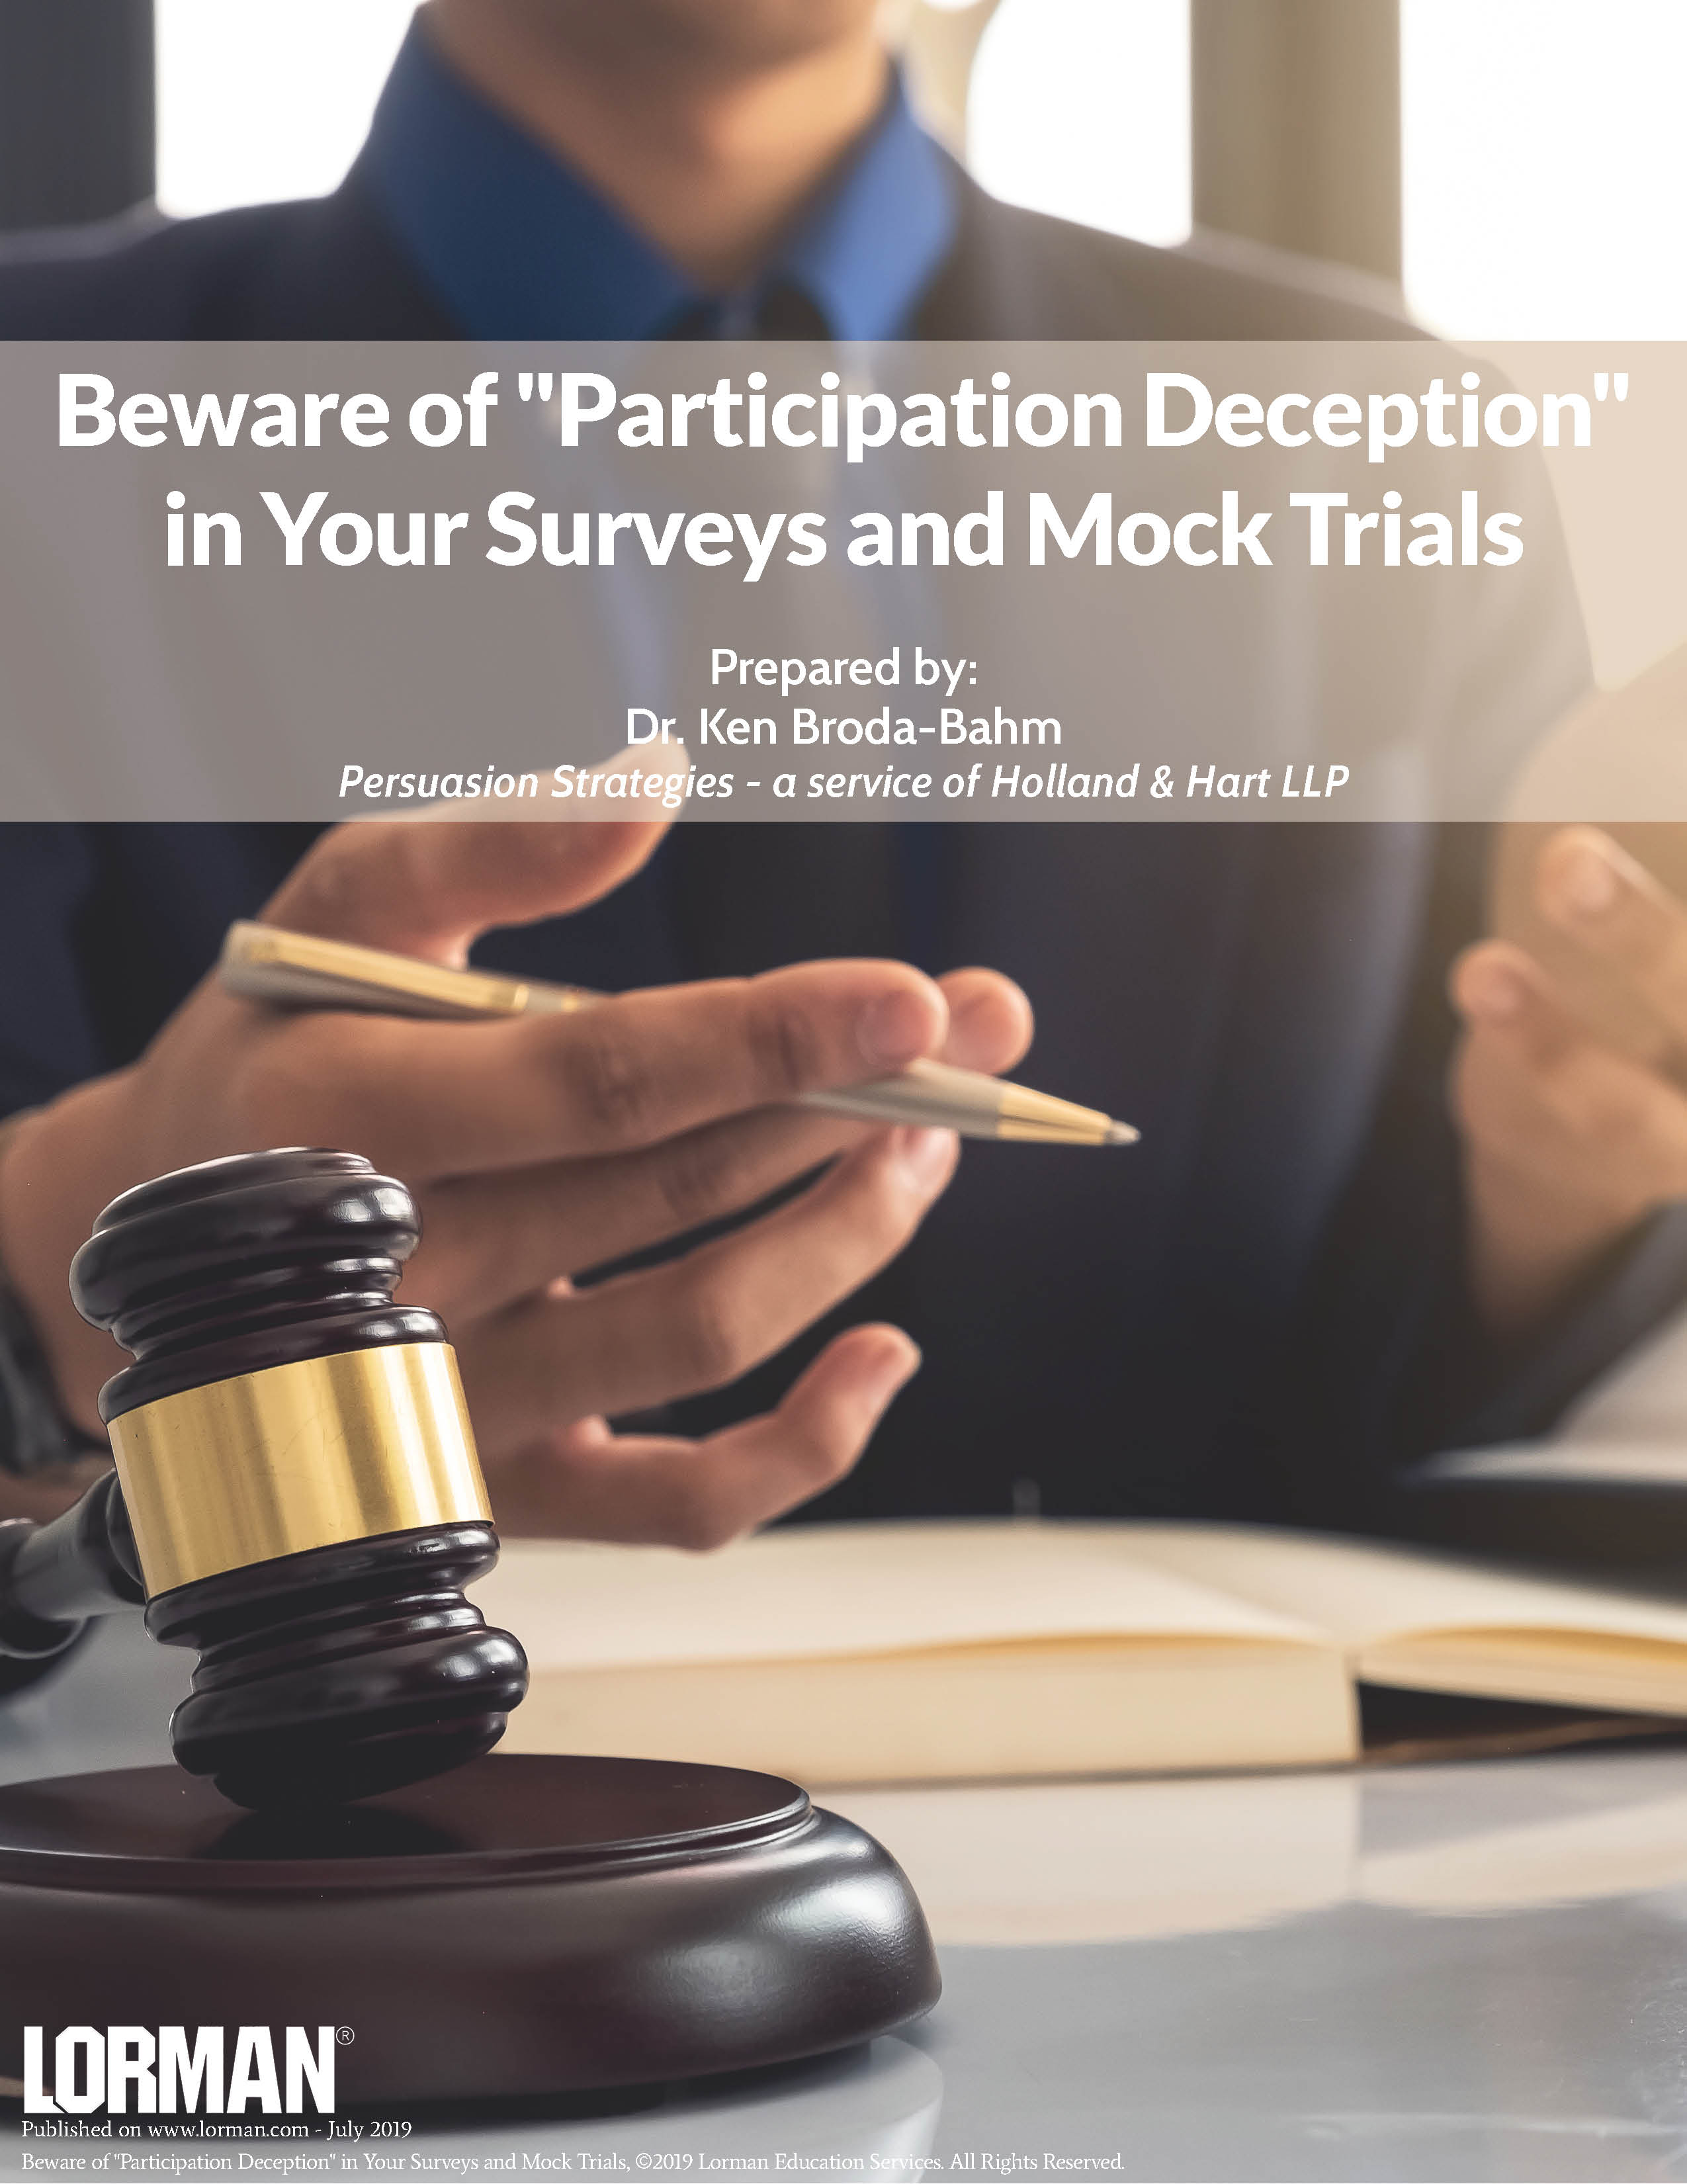 Beware of Participation Deception in Your Surveys and Mock Trials